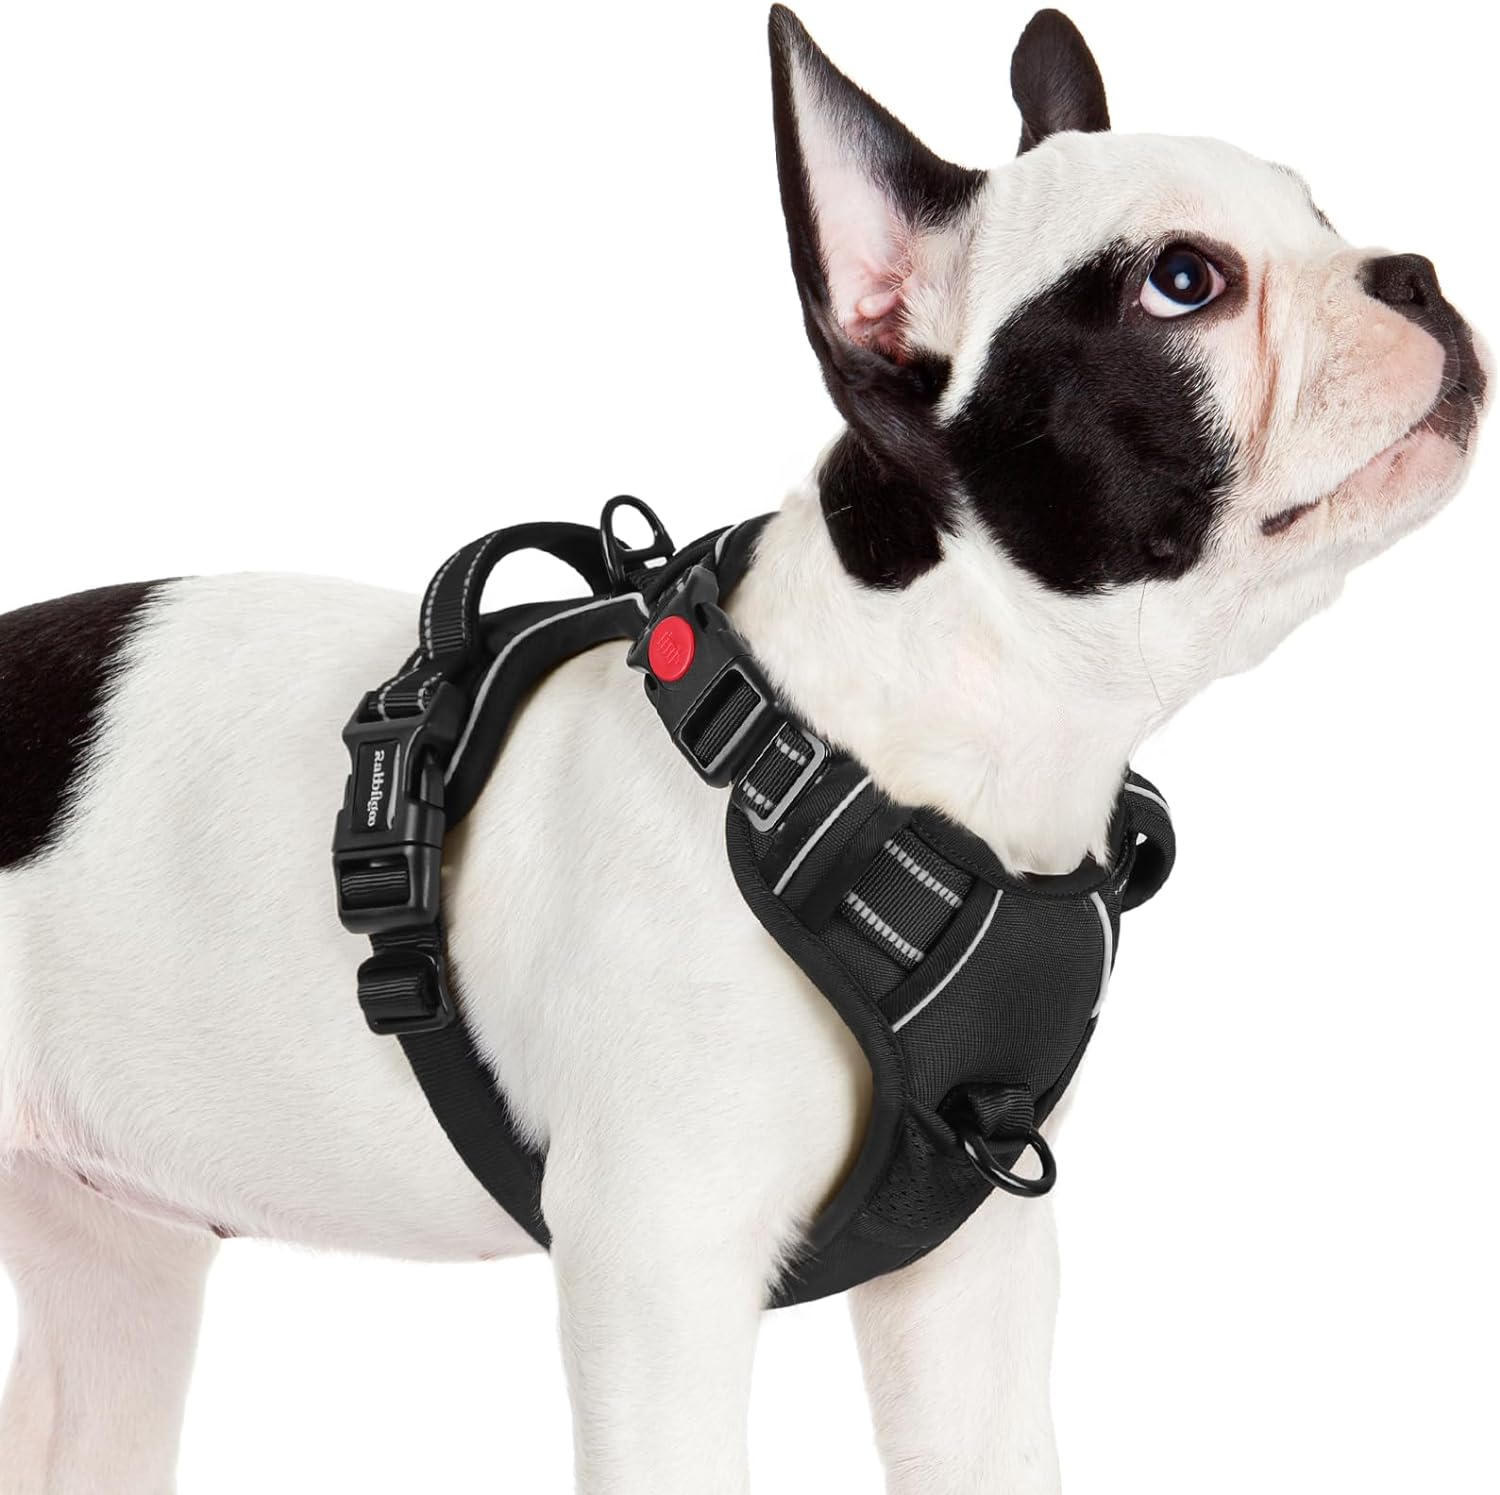 rabbitgoo Dog Harness Small Sized, No Pull Pet Harness with 3 Buckles, Adjustable Soft Padded Dog Vest with Instant Control Handle, Easy Walking Reflective Pet Vest for Small Dogs, Black, S